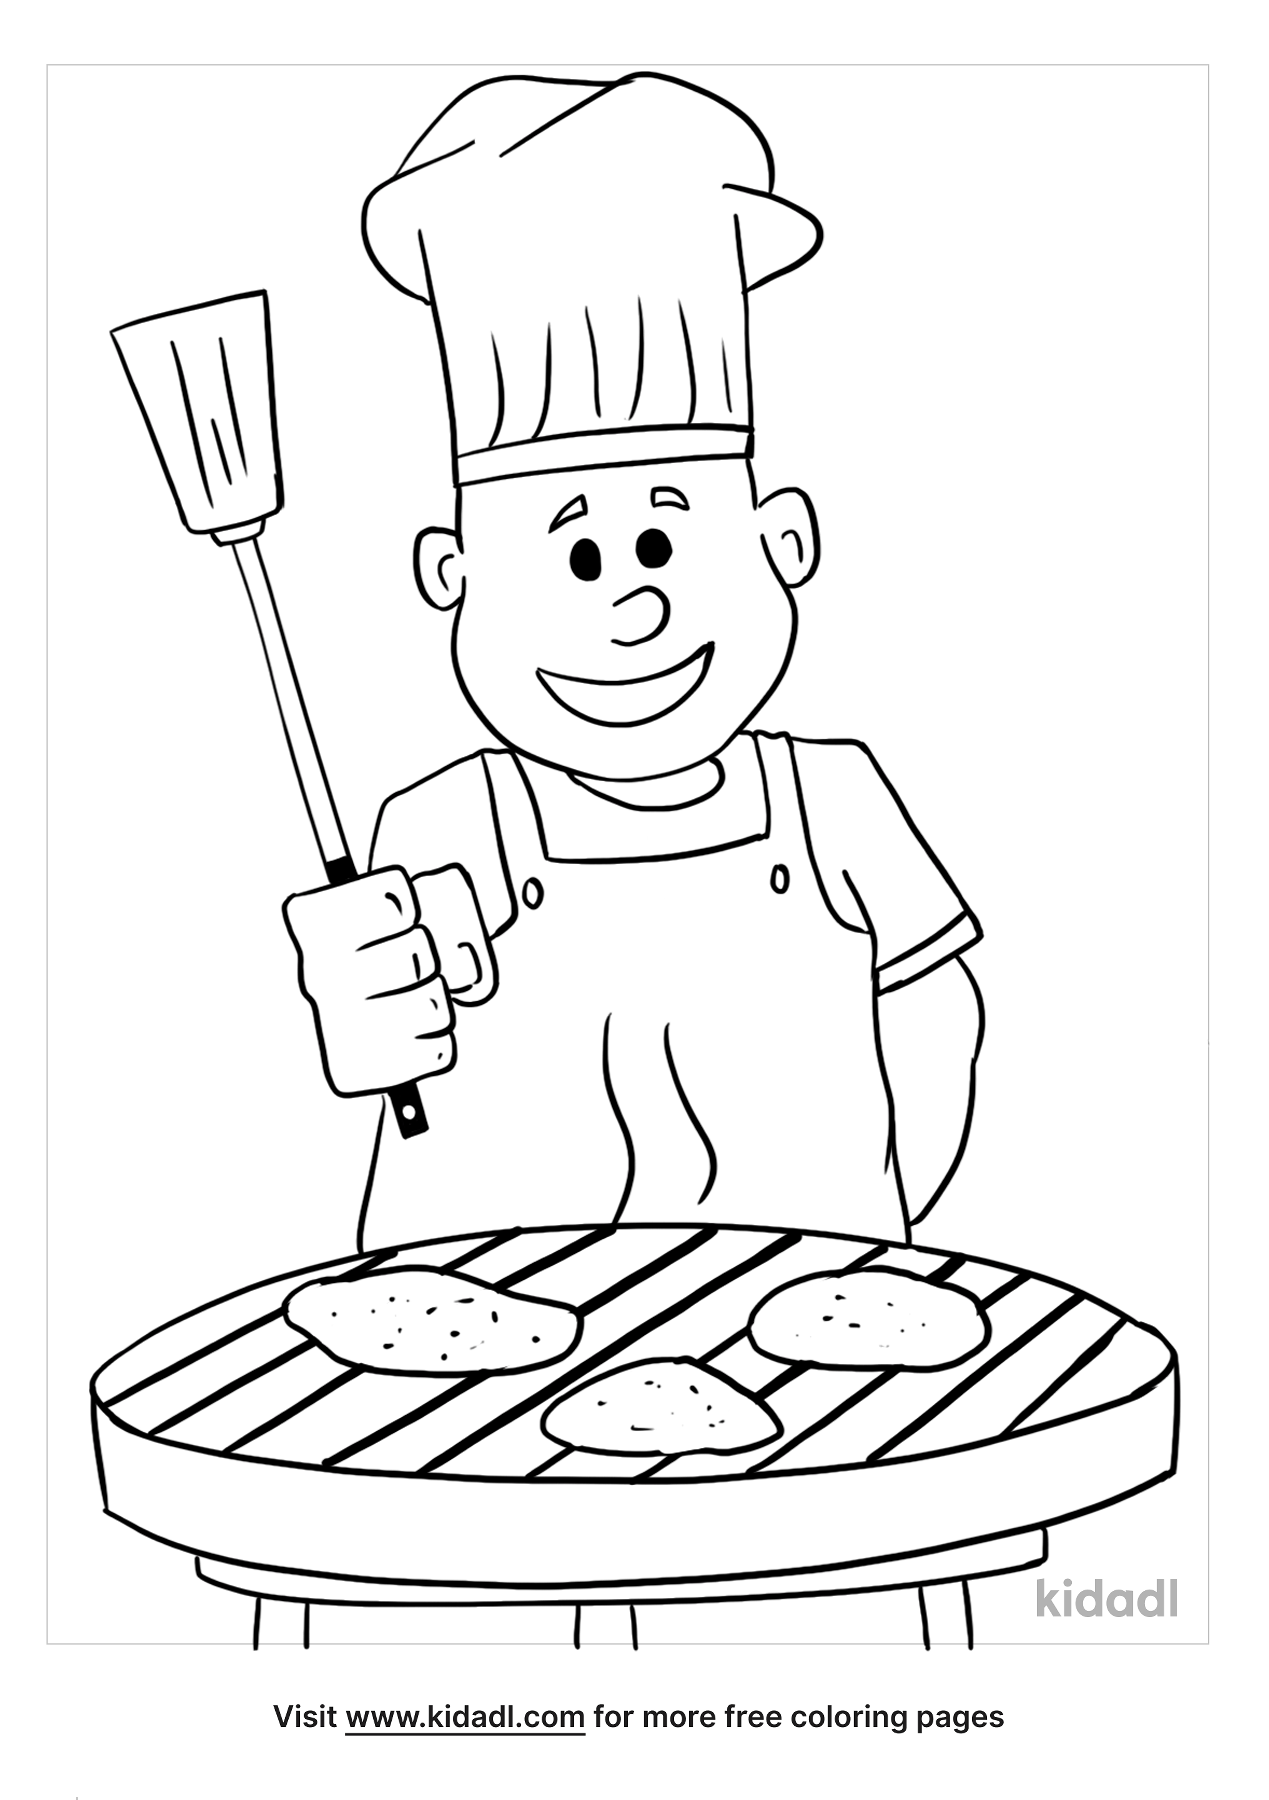 BBQ Coloring Pages | Free Food Coloring Pages | Kidadl